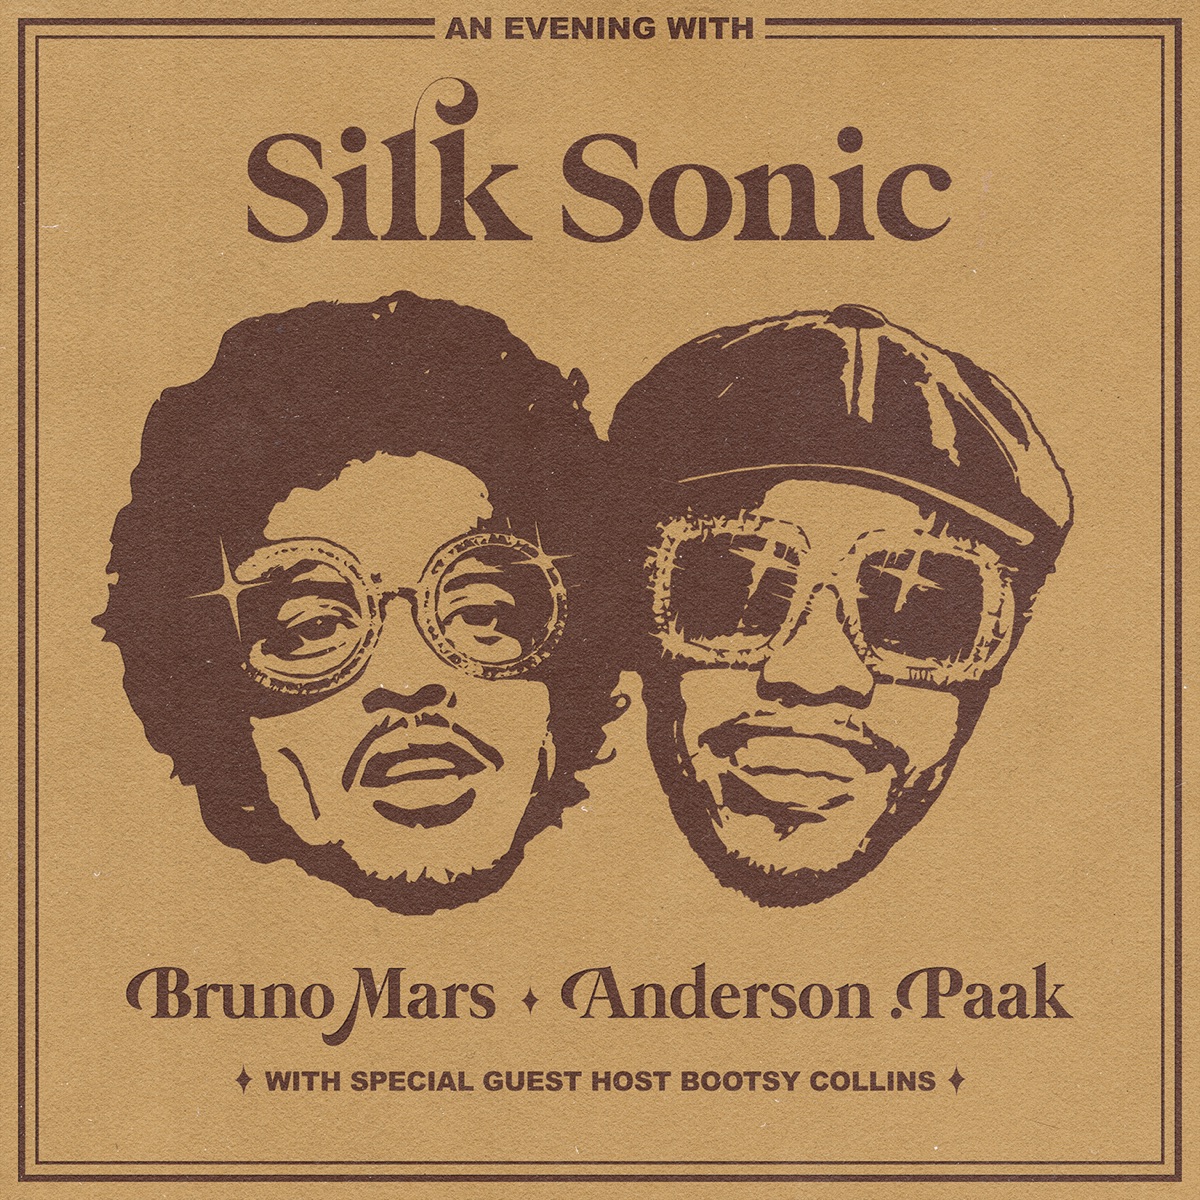 『Bruno Mars, Anderson .Paak, Silk Sonic - After Last Night (with Thundercat & Bootsy Collins)』収録の『An Evening With Silk Sonic 』ジャケット